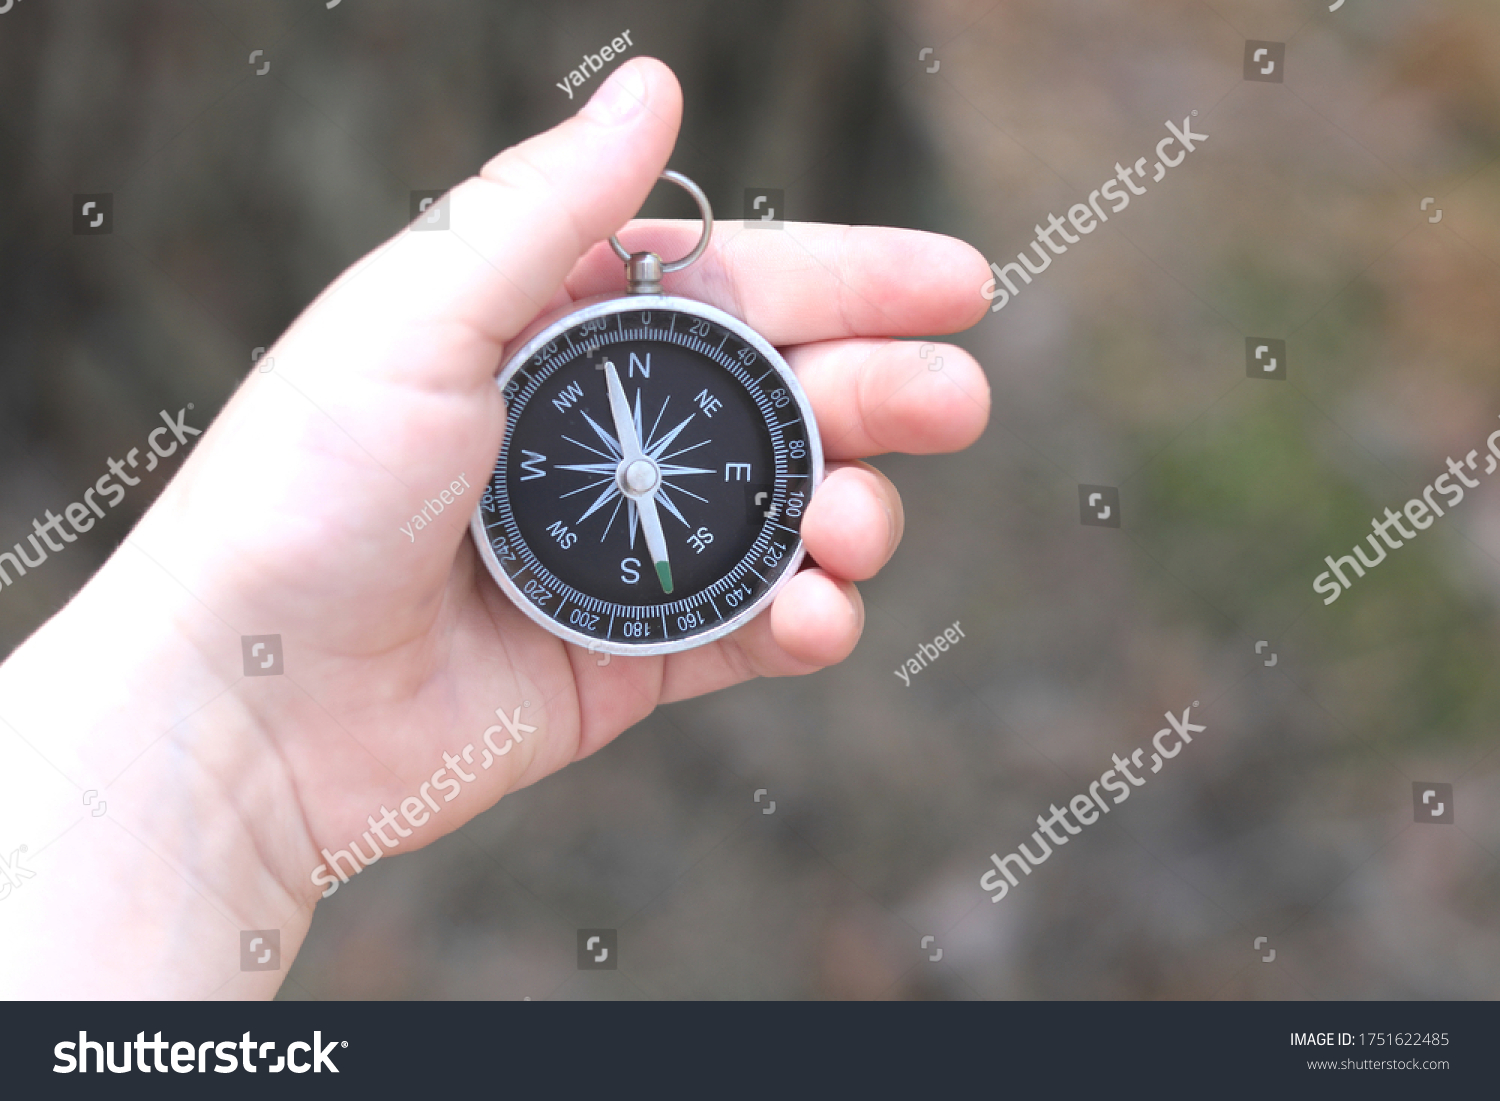 Old classic navigation compass in childs hand on natural background #1751622485